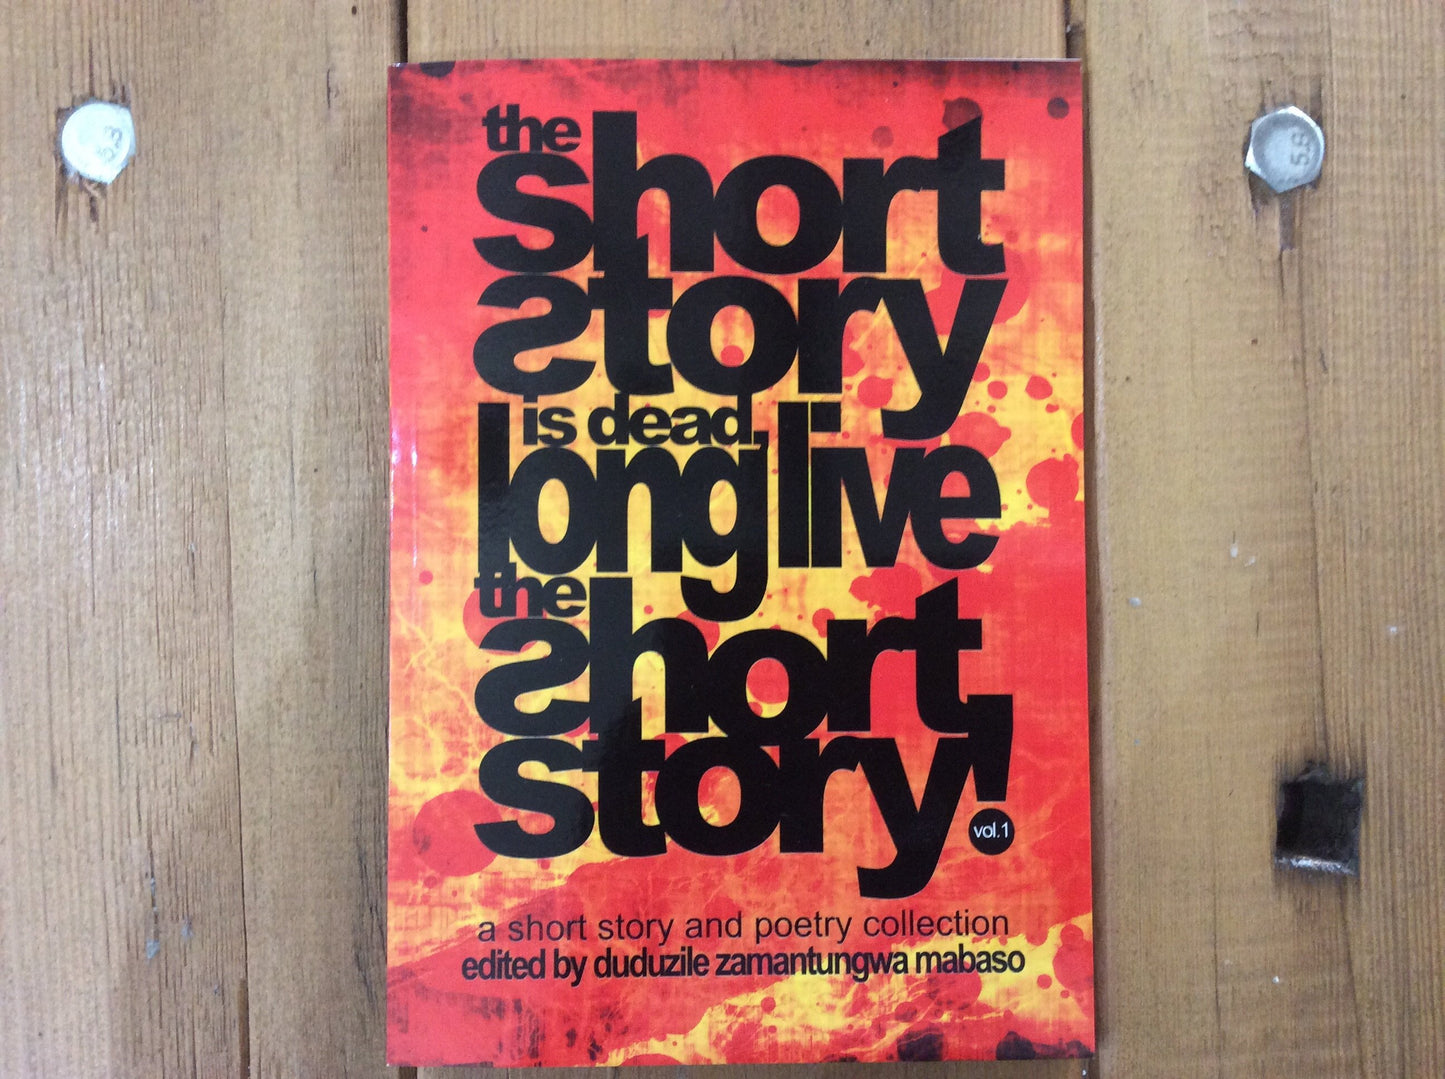 The Short Story is Dead, Long Live the Short Story!